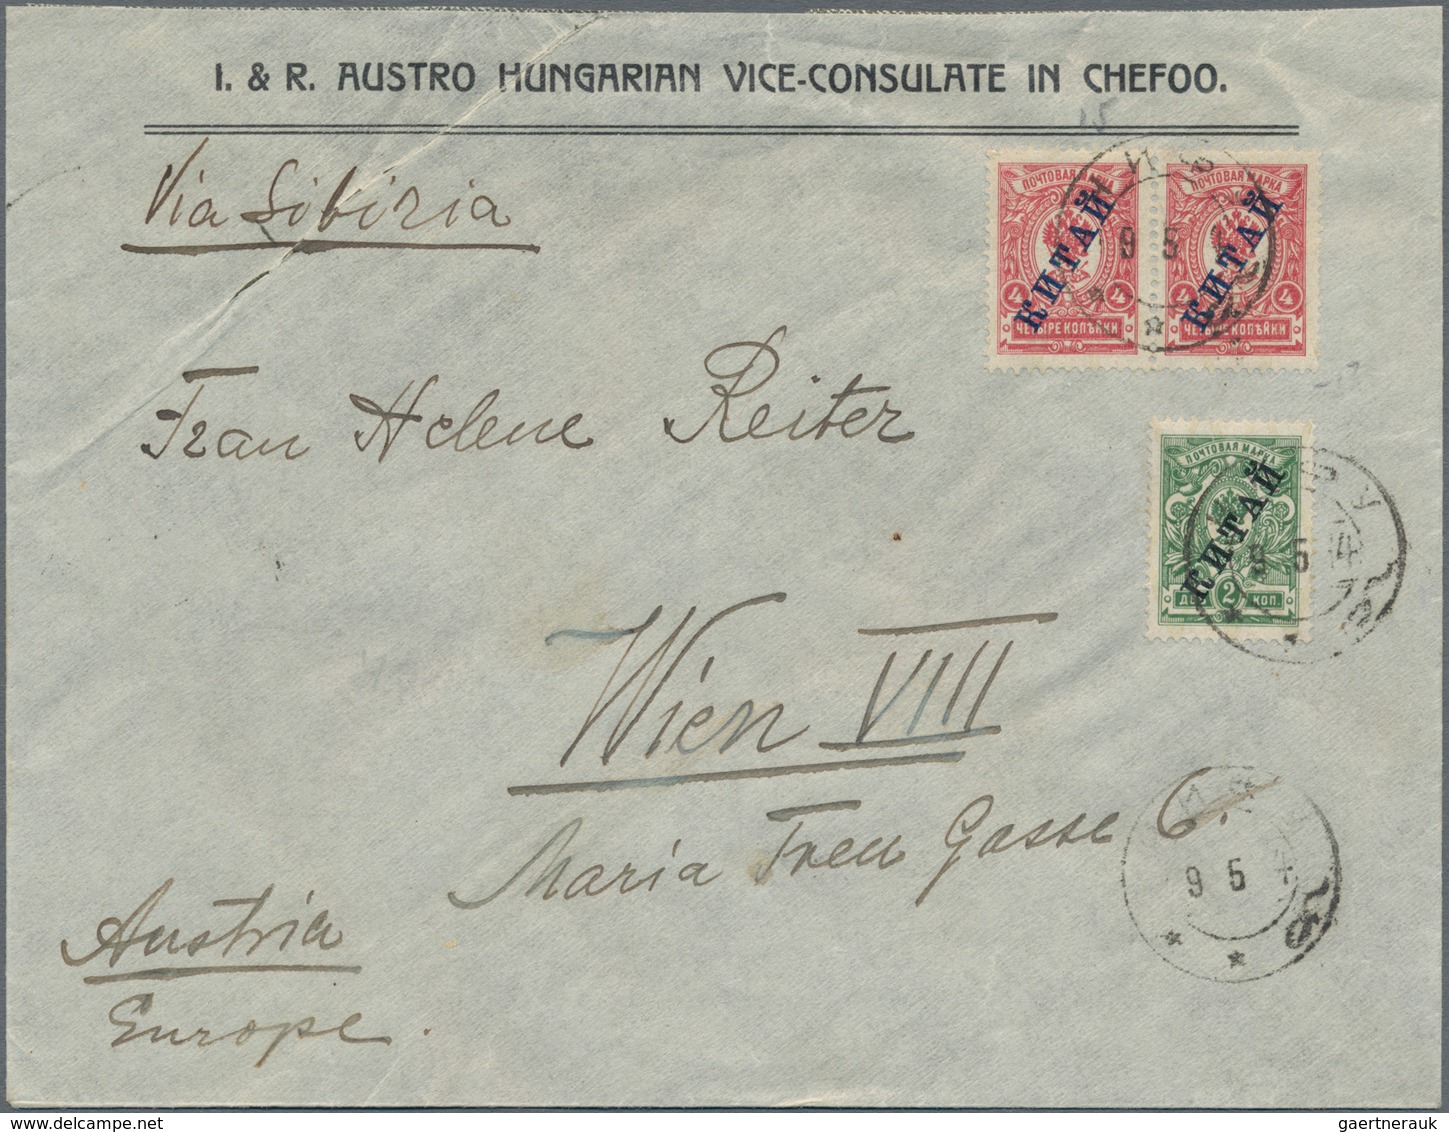 Russische Post In China: 1910, 2 K. Green And 4 K. Carmine (2, Blue Ovpt.) Tied "INKOU 9 5 14" To Co - China